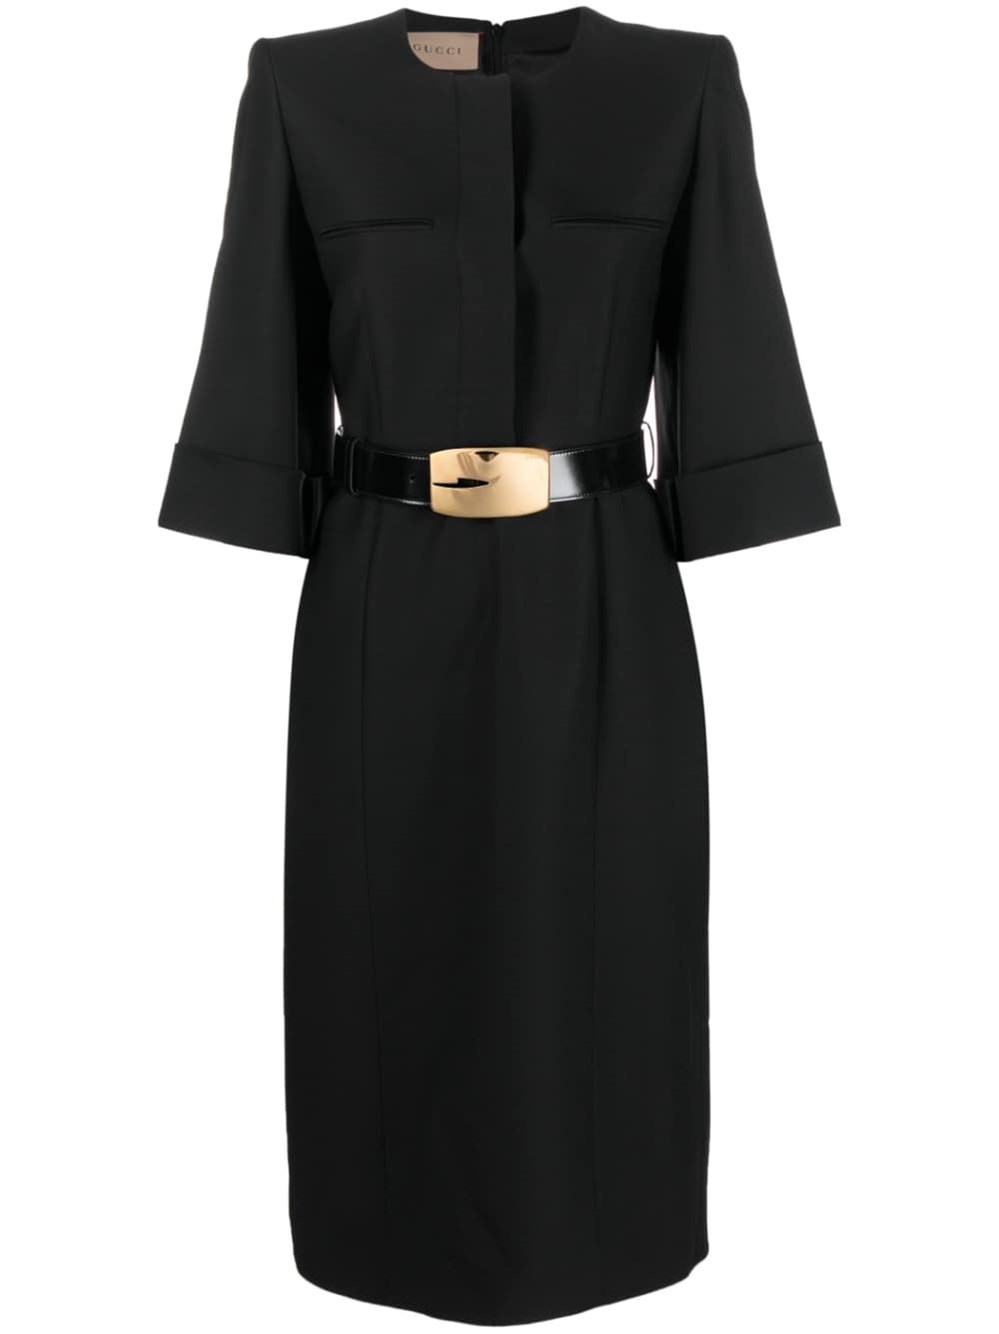 GUCCI SOFT WOOL SILK DRESS WITH LEATHER BELT